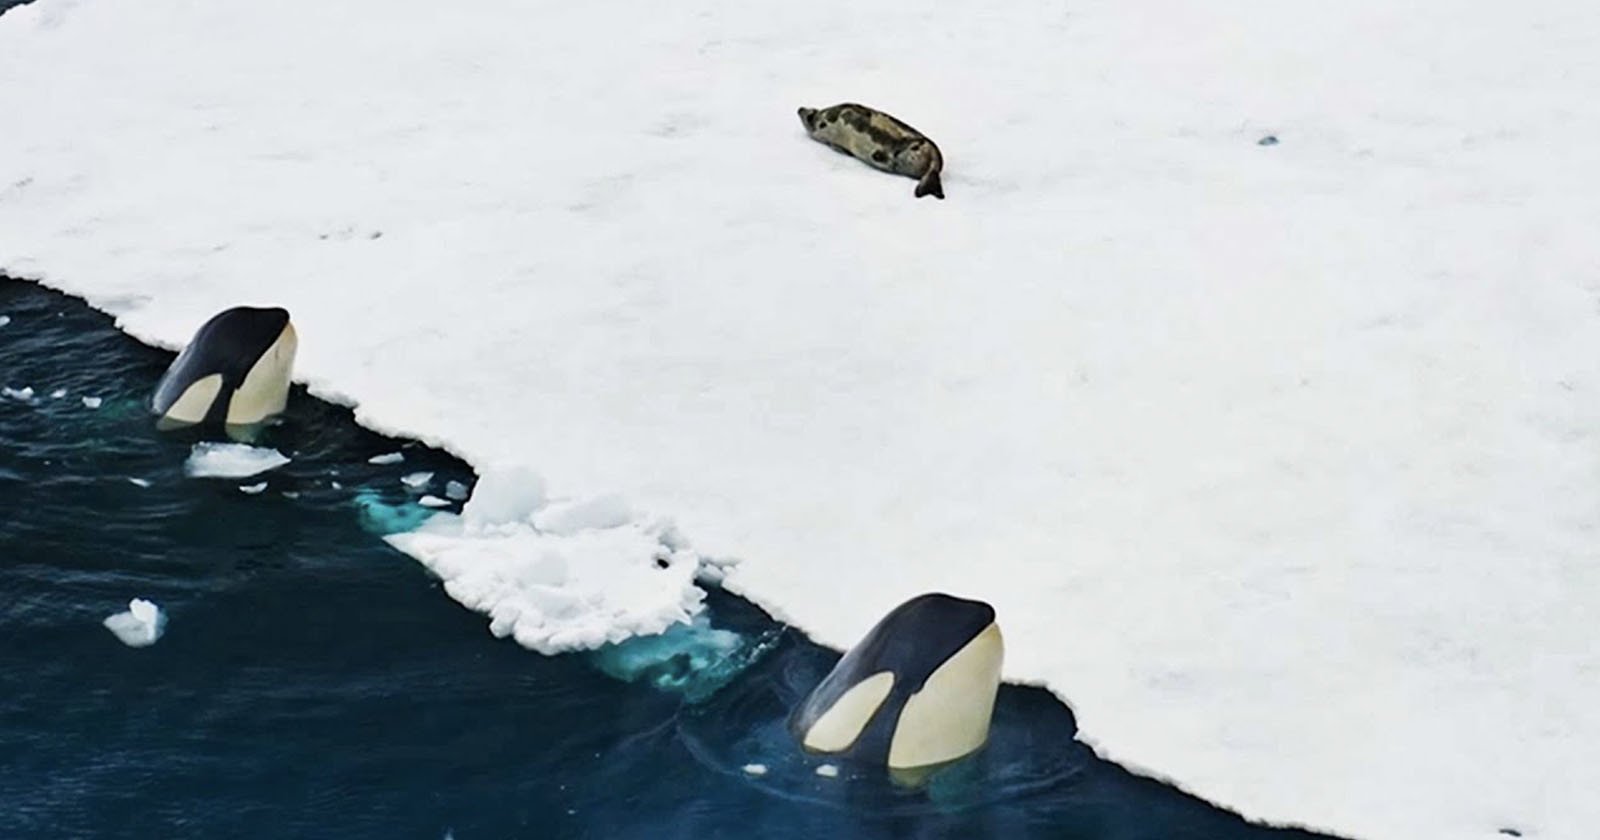 Drones Capture Orcas Hunting a Seal from the Air for the First Time